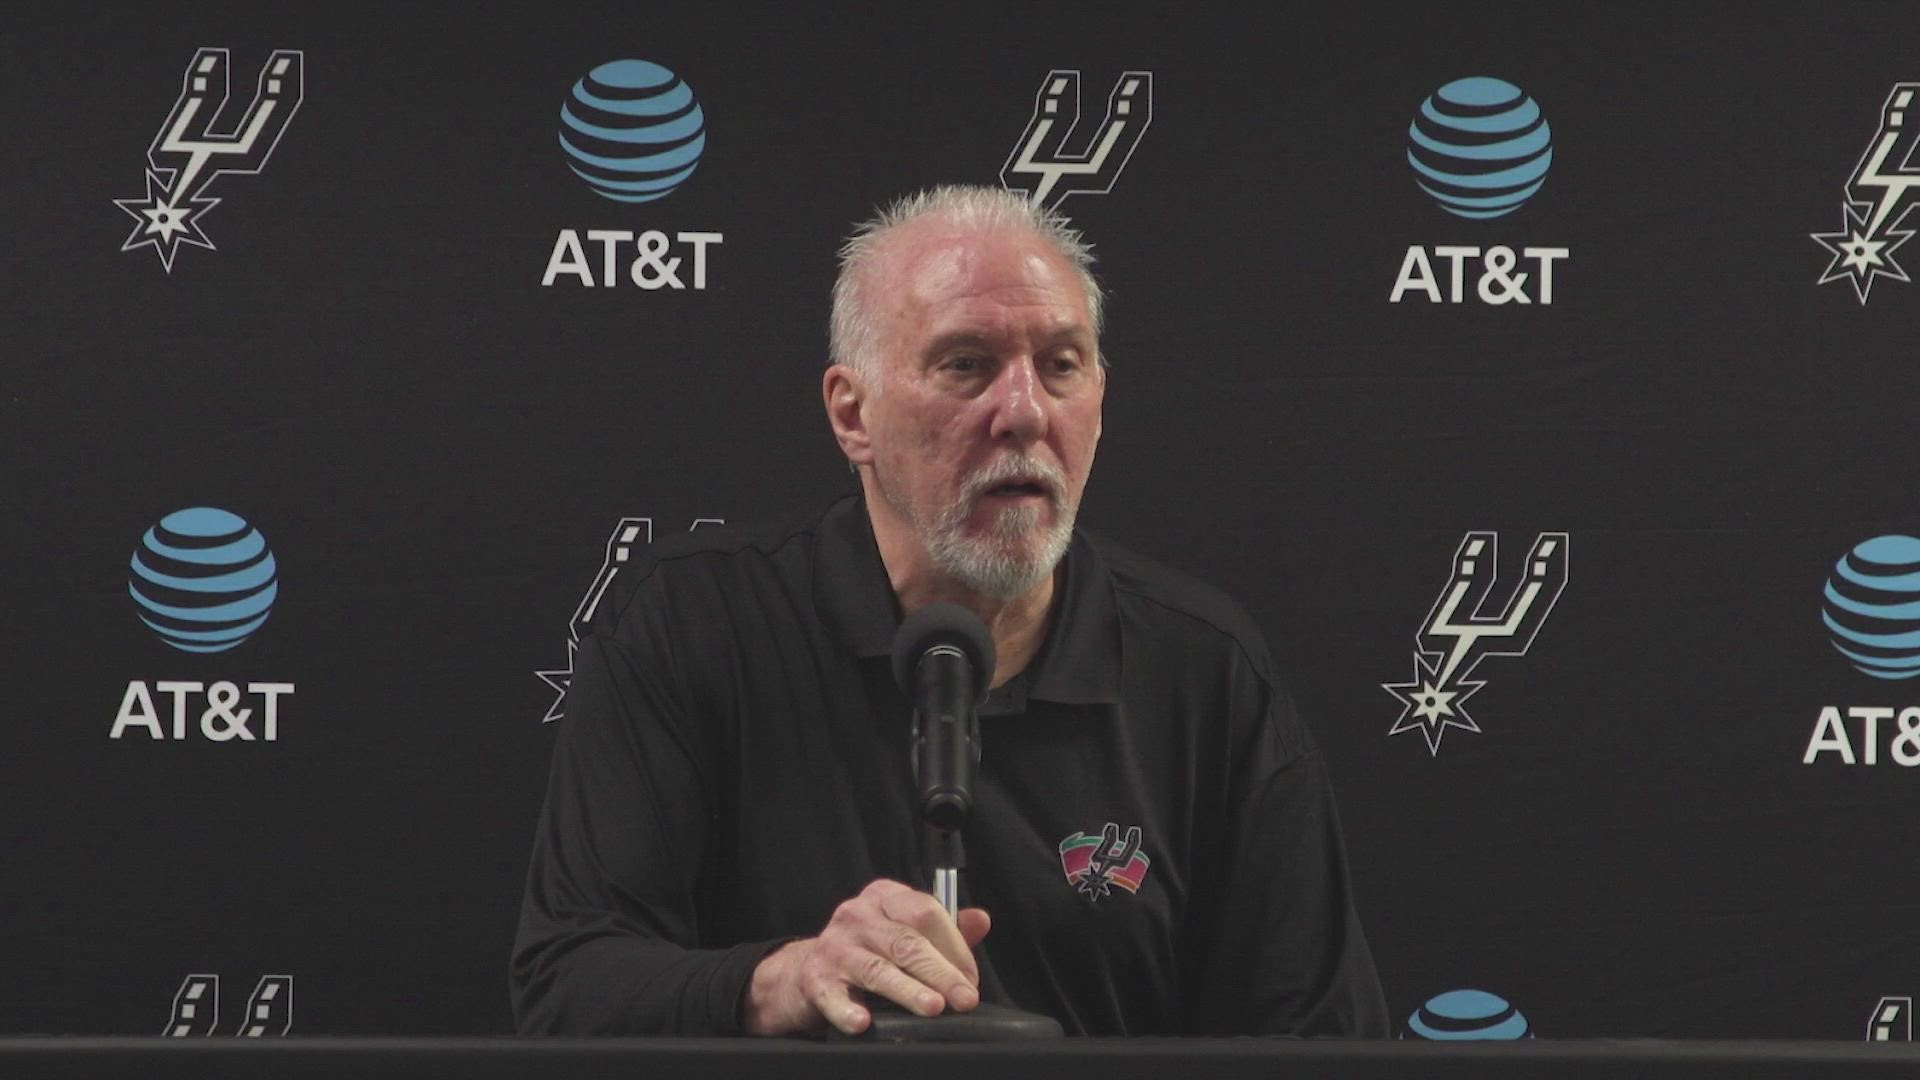 "Something like this doesn't belong to just one person," Popovich said after the Spurs came back to beat the Jazz and give him win number 1,336.